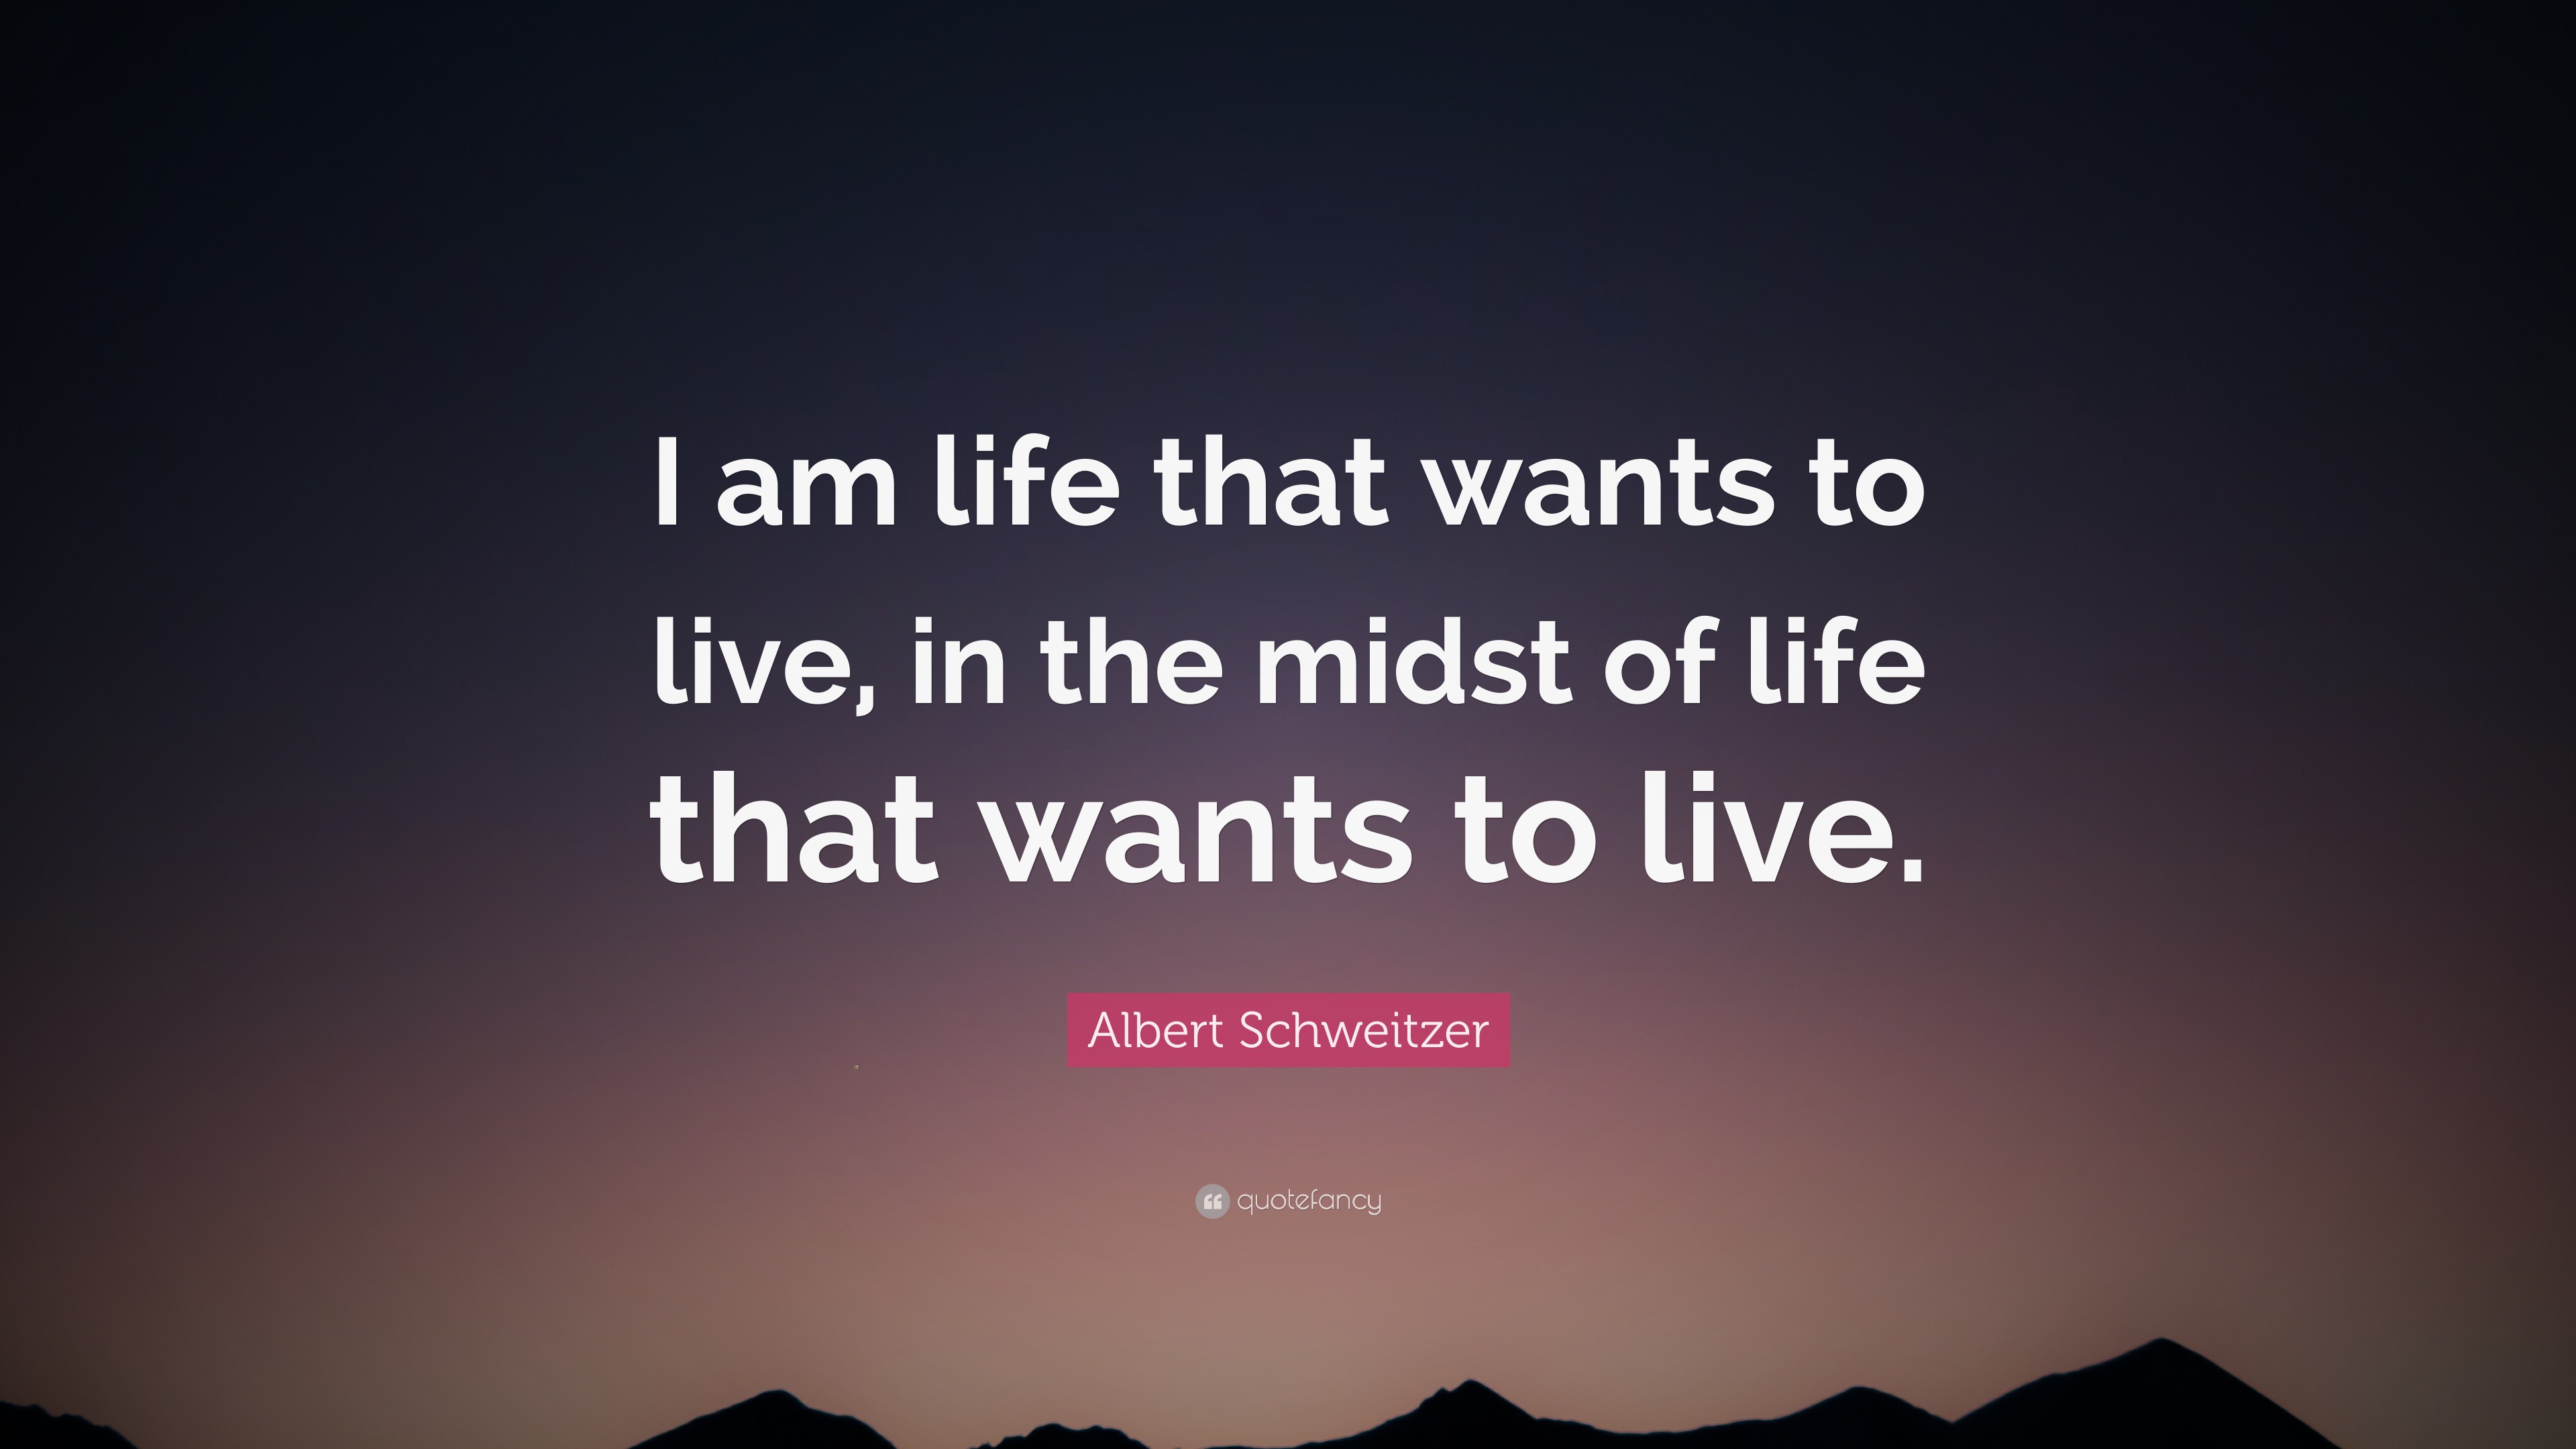 Out of My Life and Thought by Albert Schweitzer